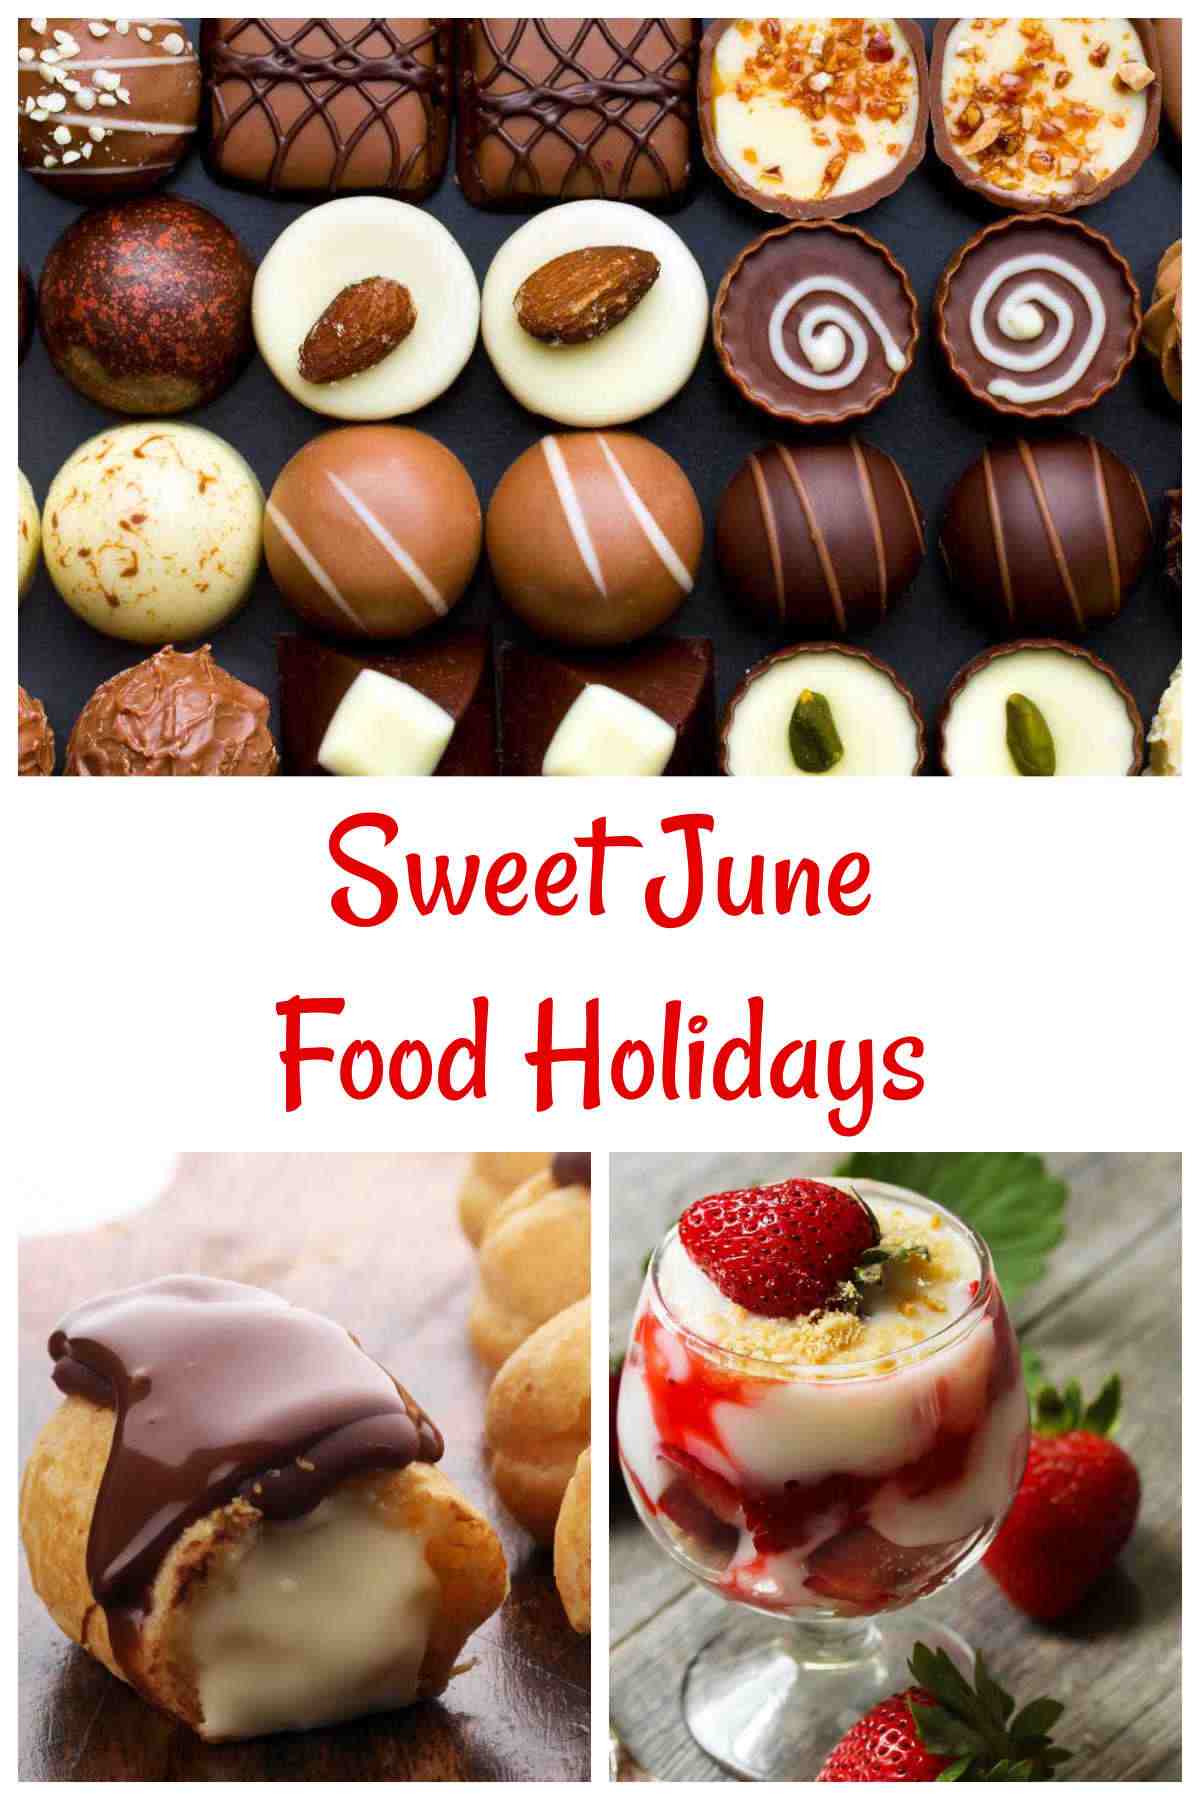 Pralines, eclairs, strawberry parfait and words Sweet June Food Holidays.